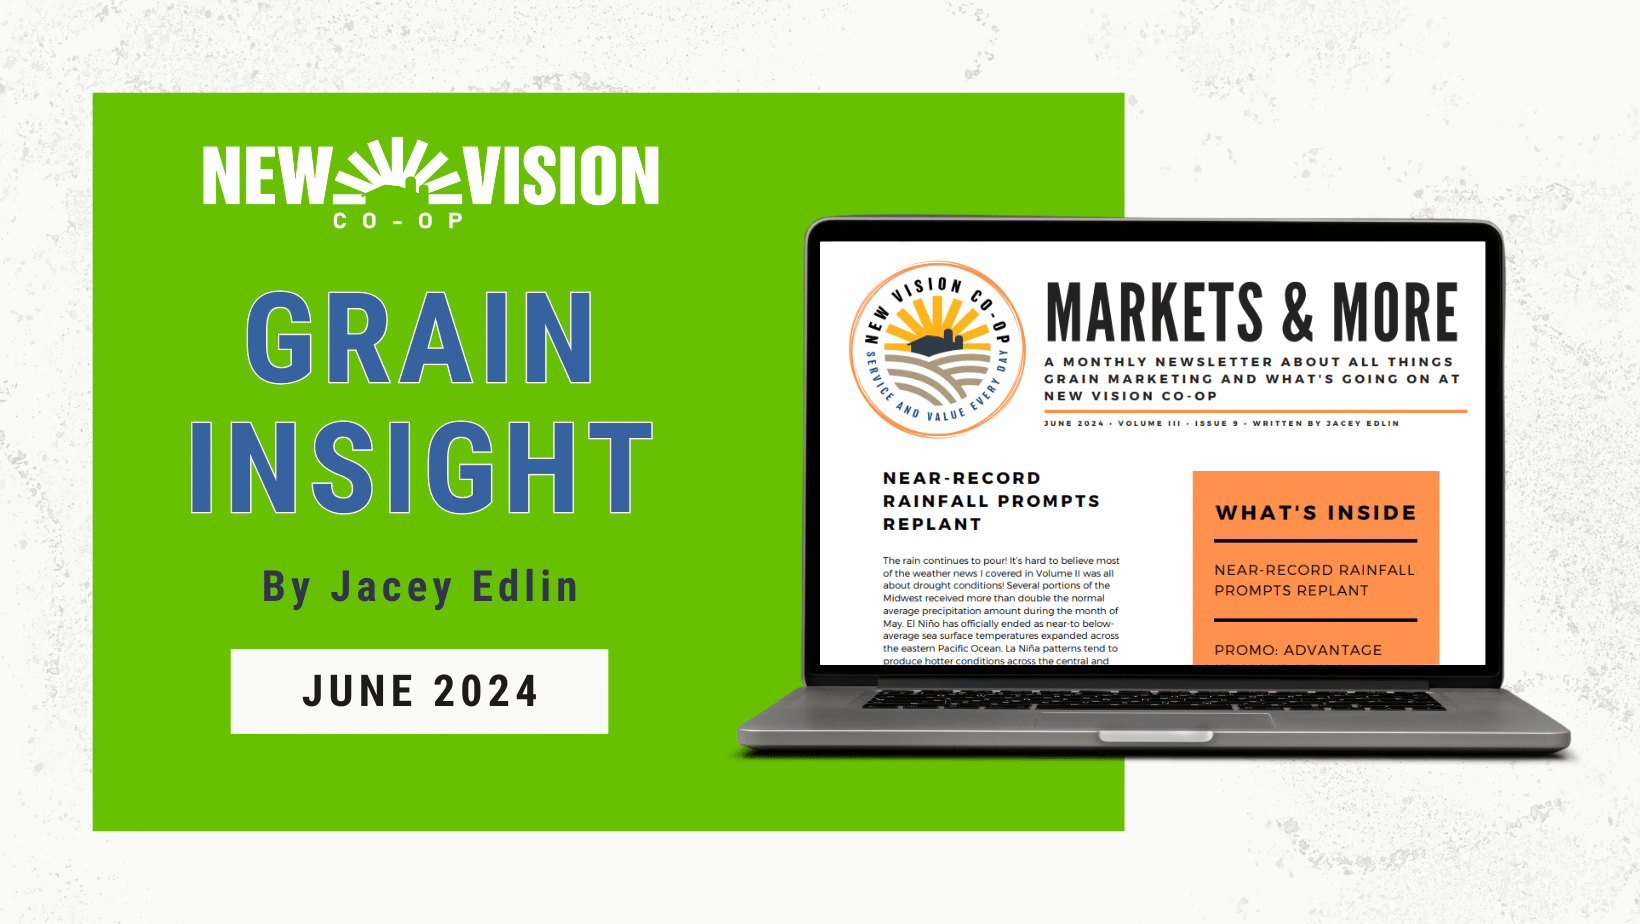 June 2024 Grain Insight | New Vision Co-op